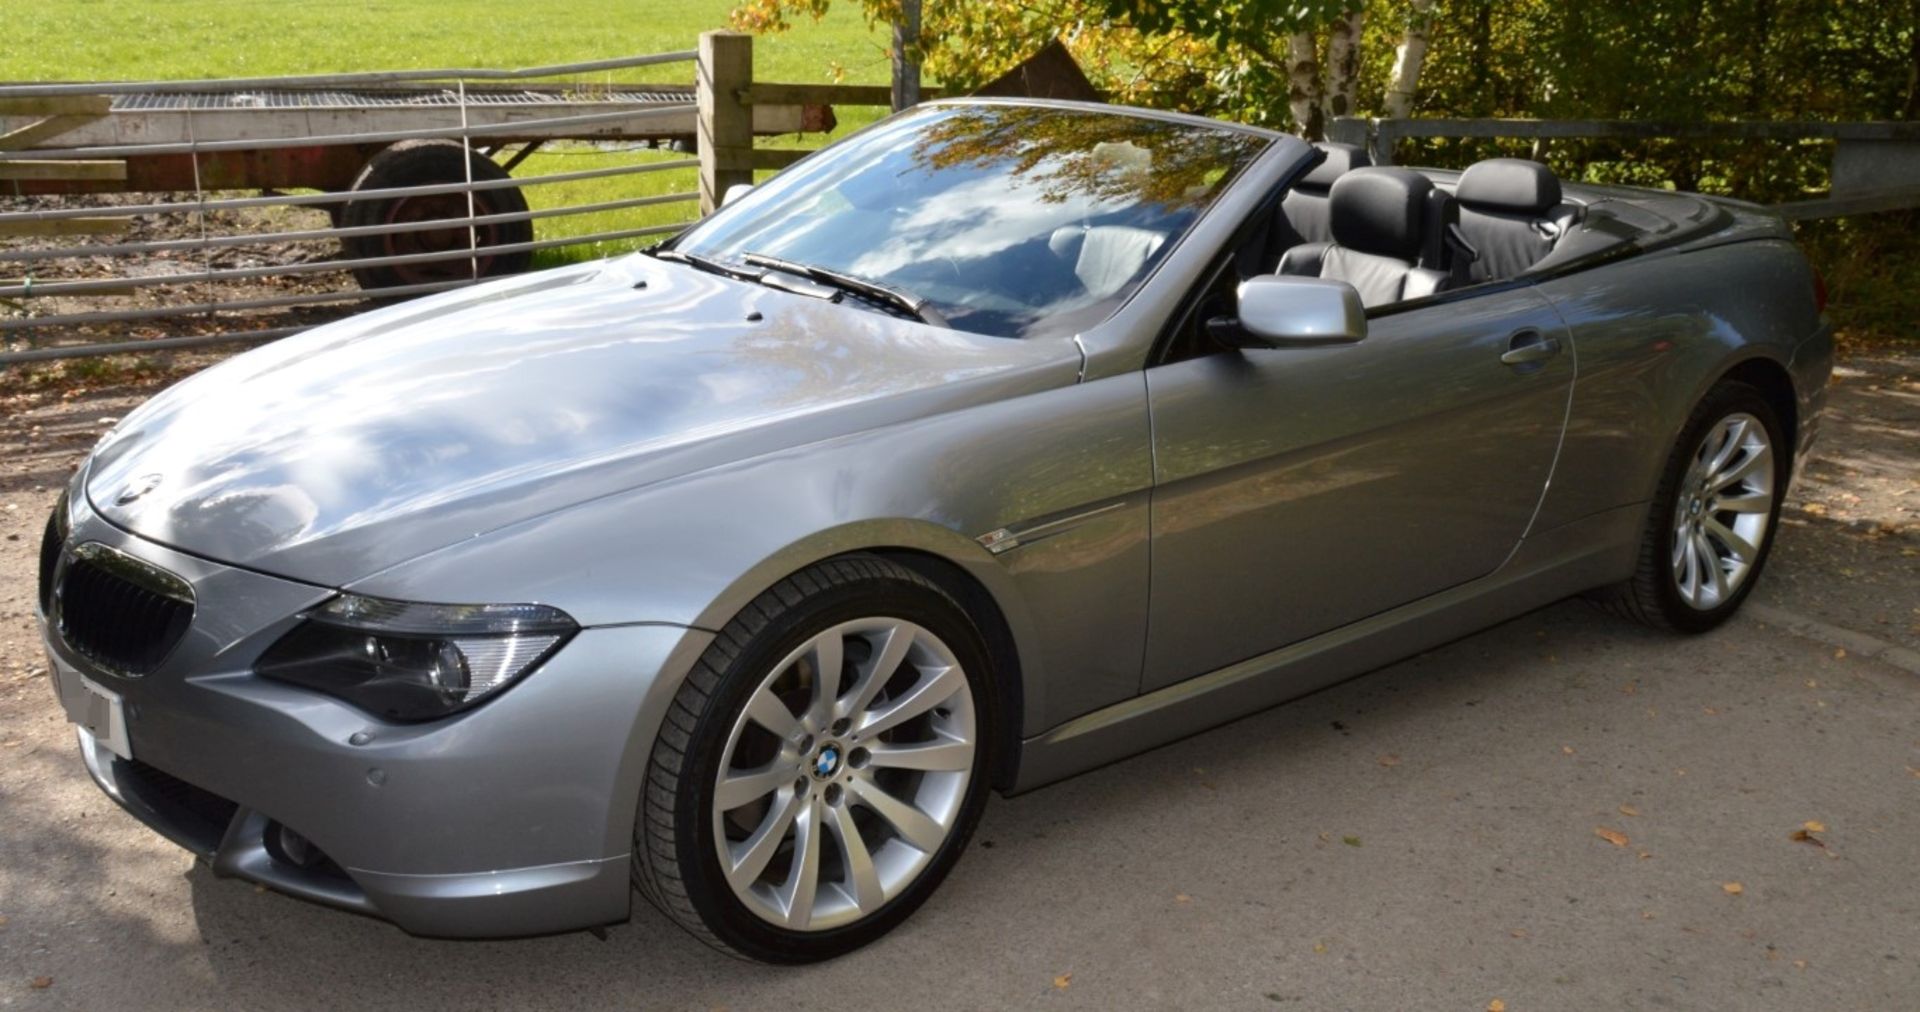 1 x BMW Series 6 630I Automatic Convertible Car - 57 Plate - NO VAT On Hammer - Image 3 of 62